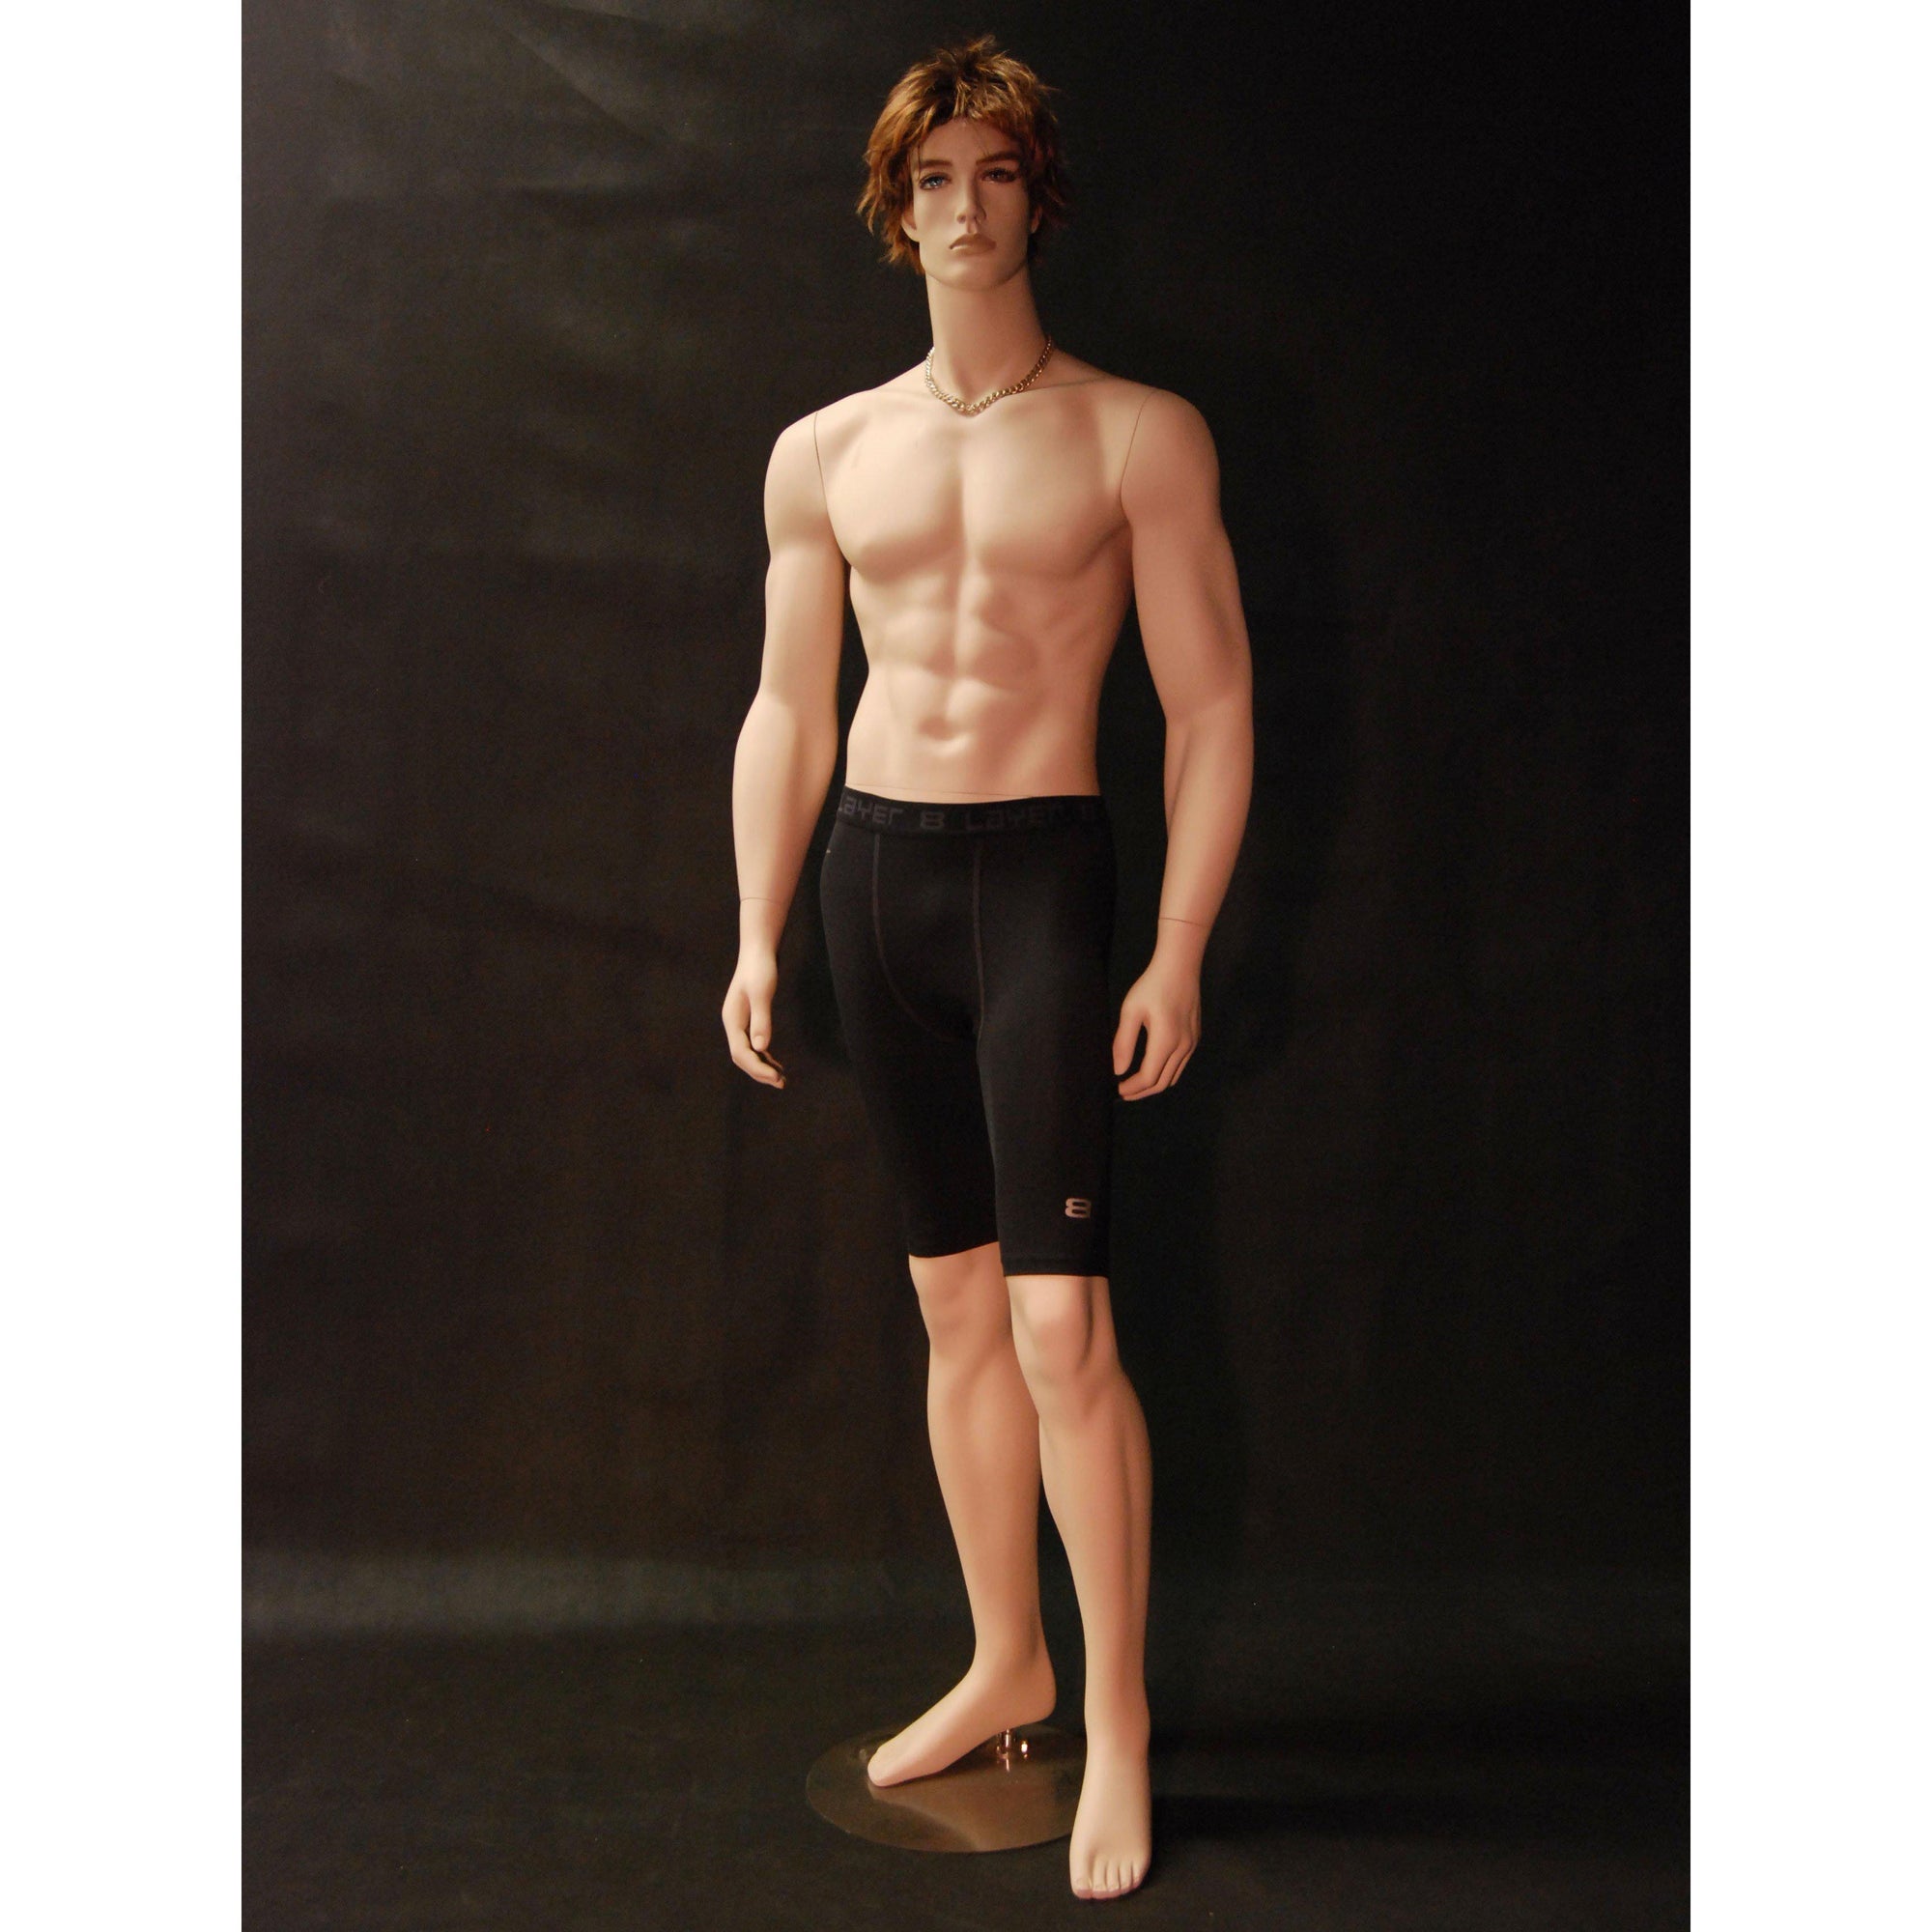 Male Realistic Mannequin MM-CCB32F - Mannequin Mall